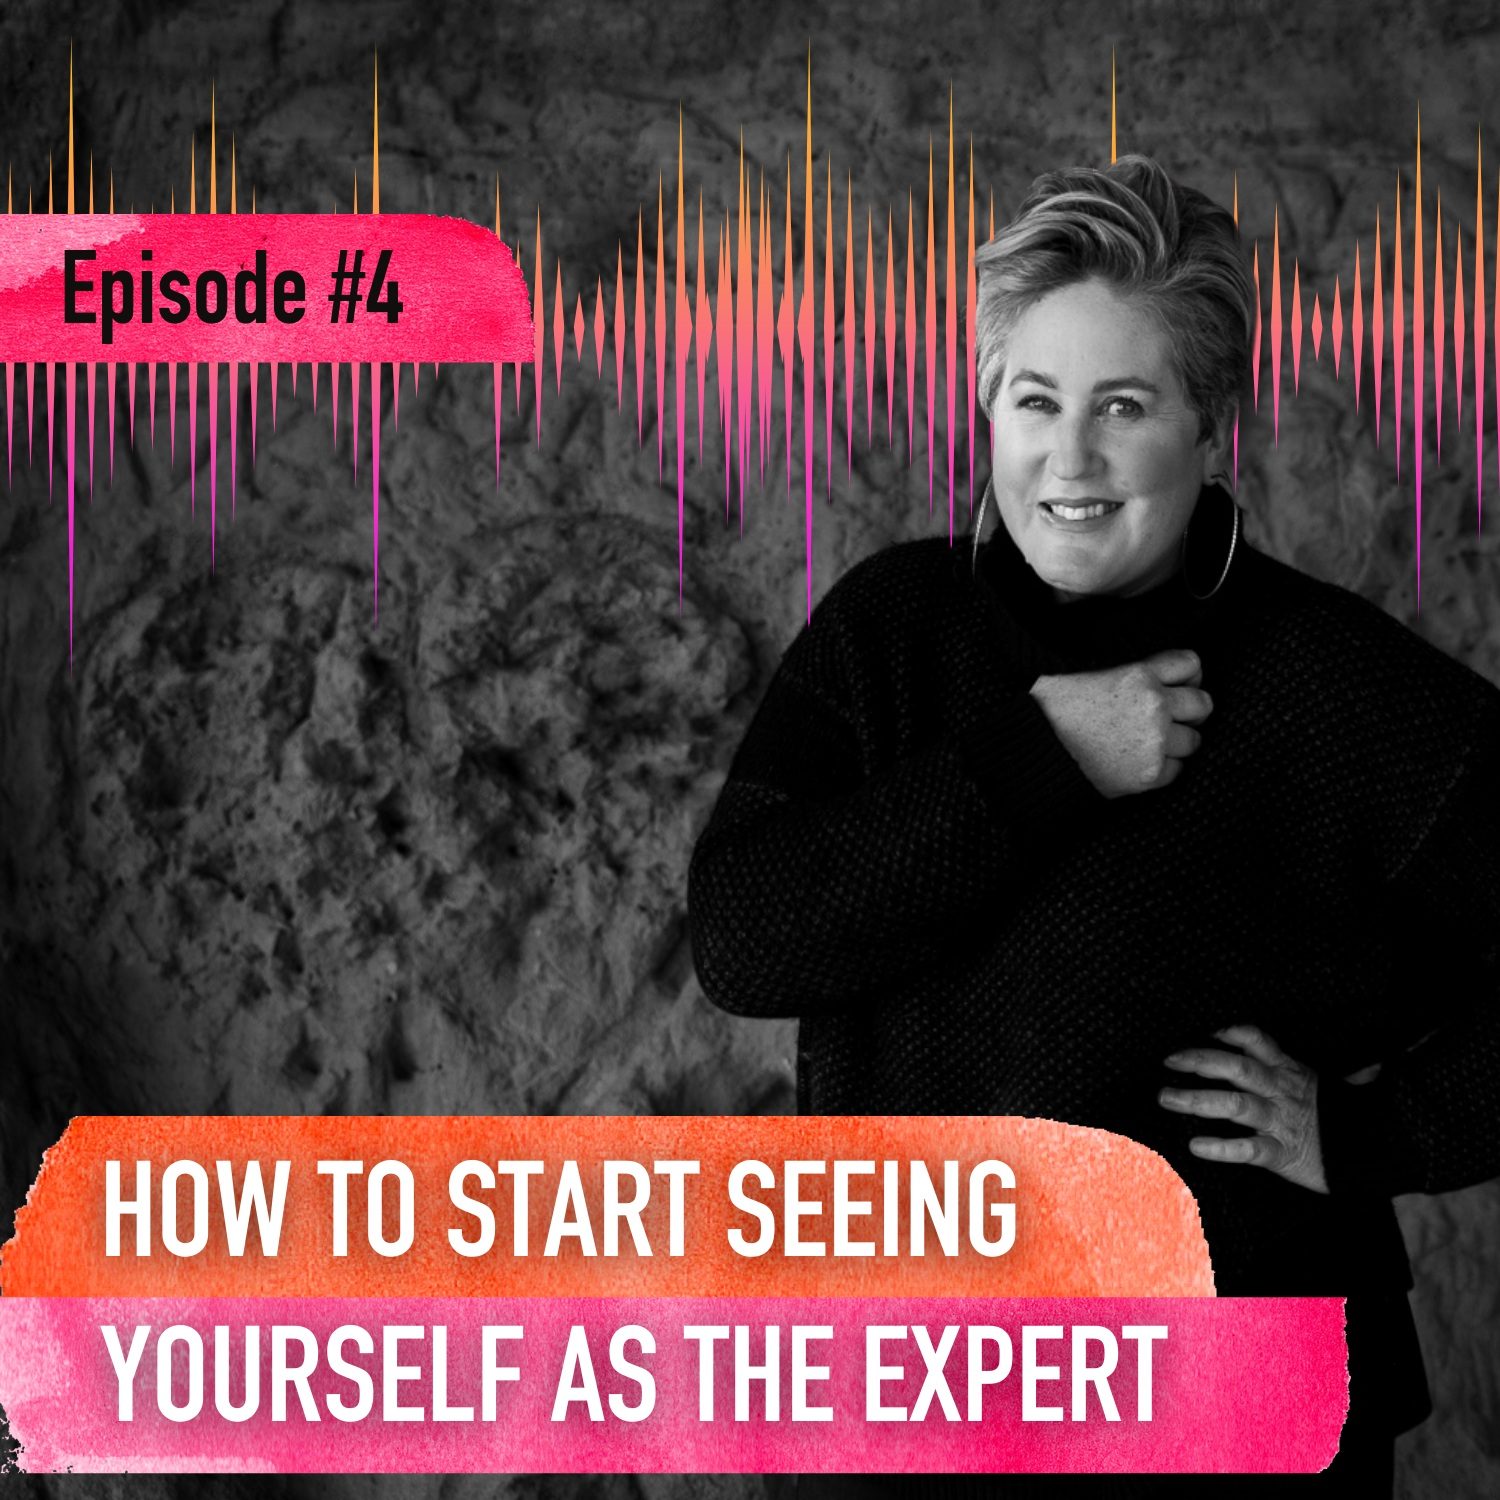 How to start seeing yourself as the expert